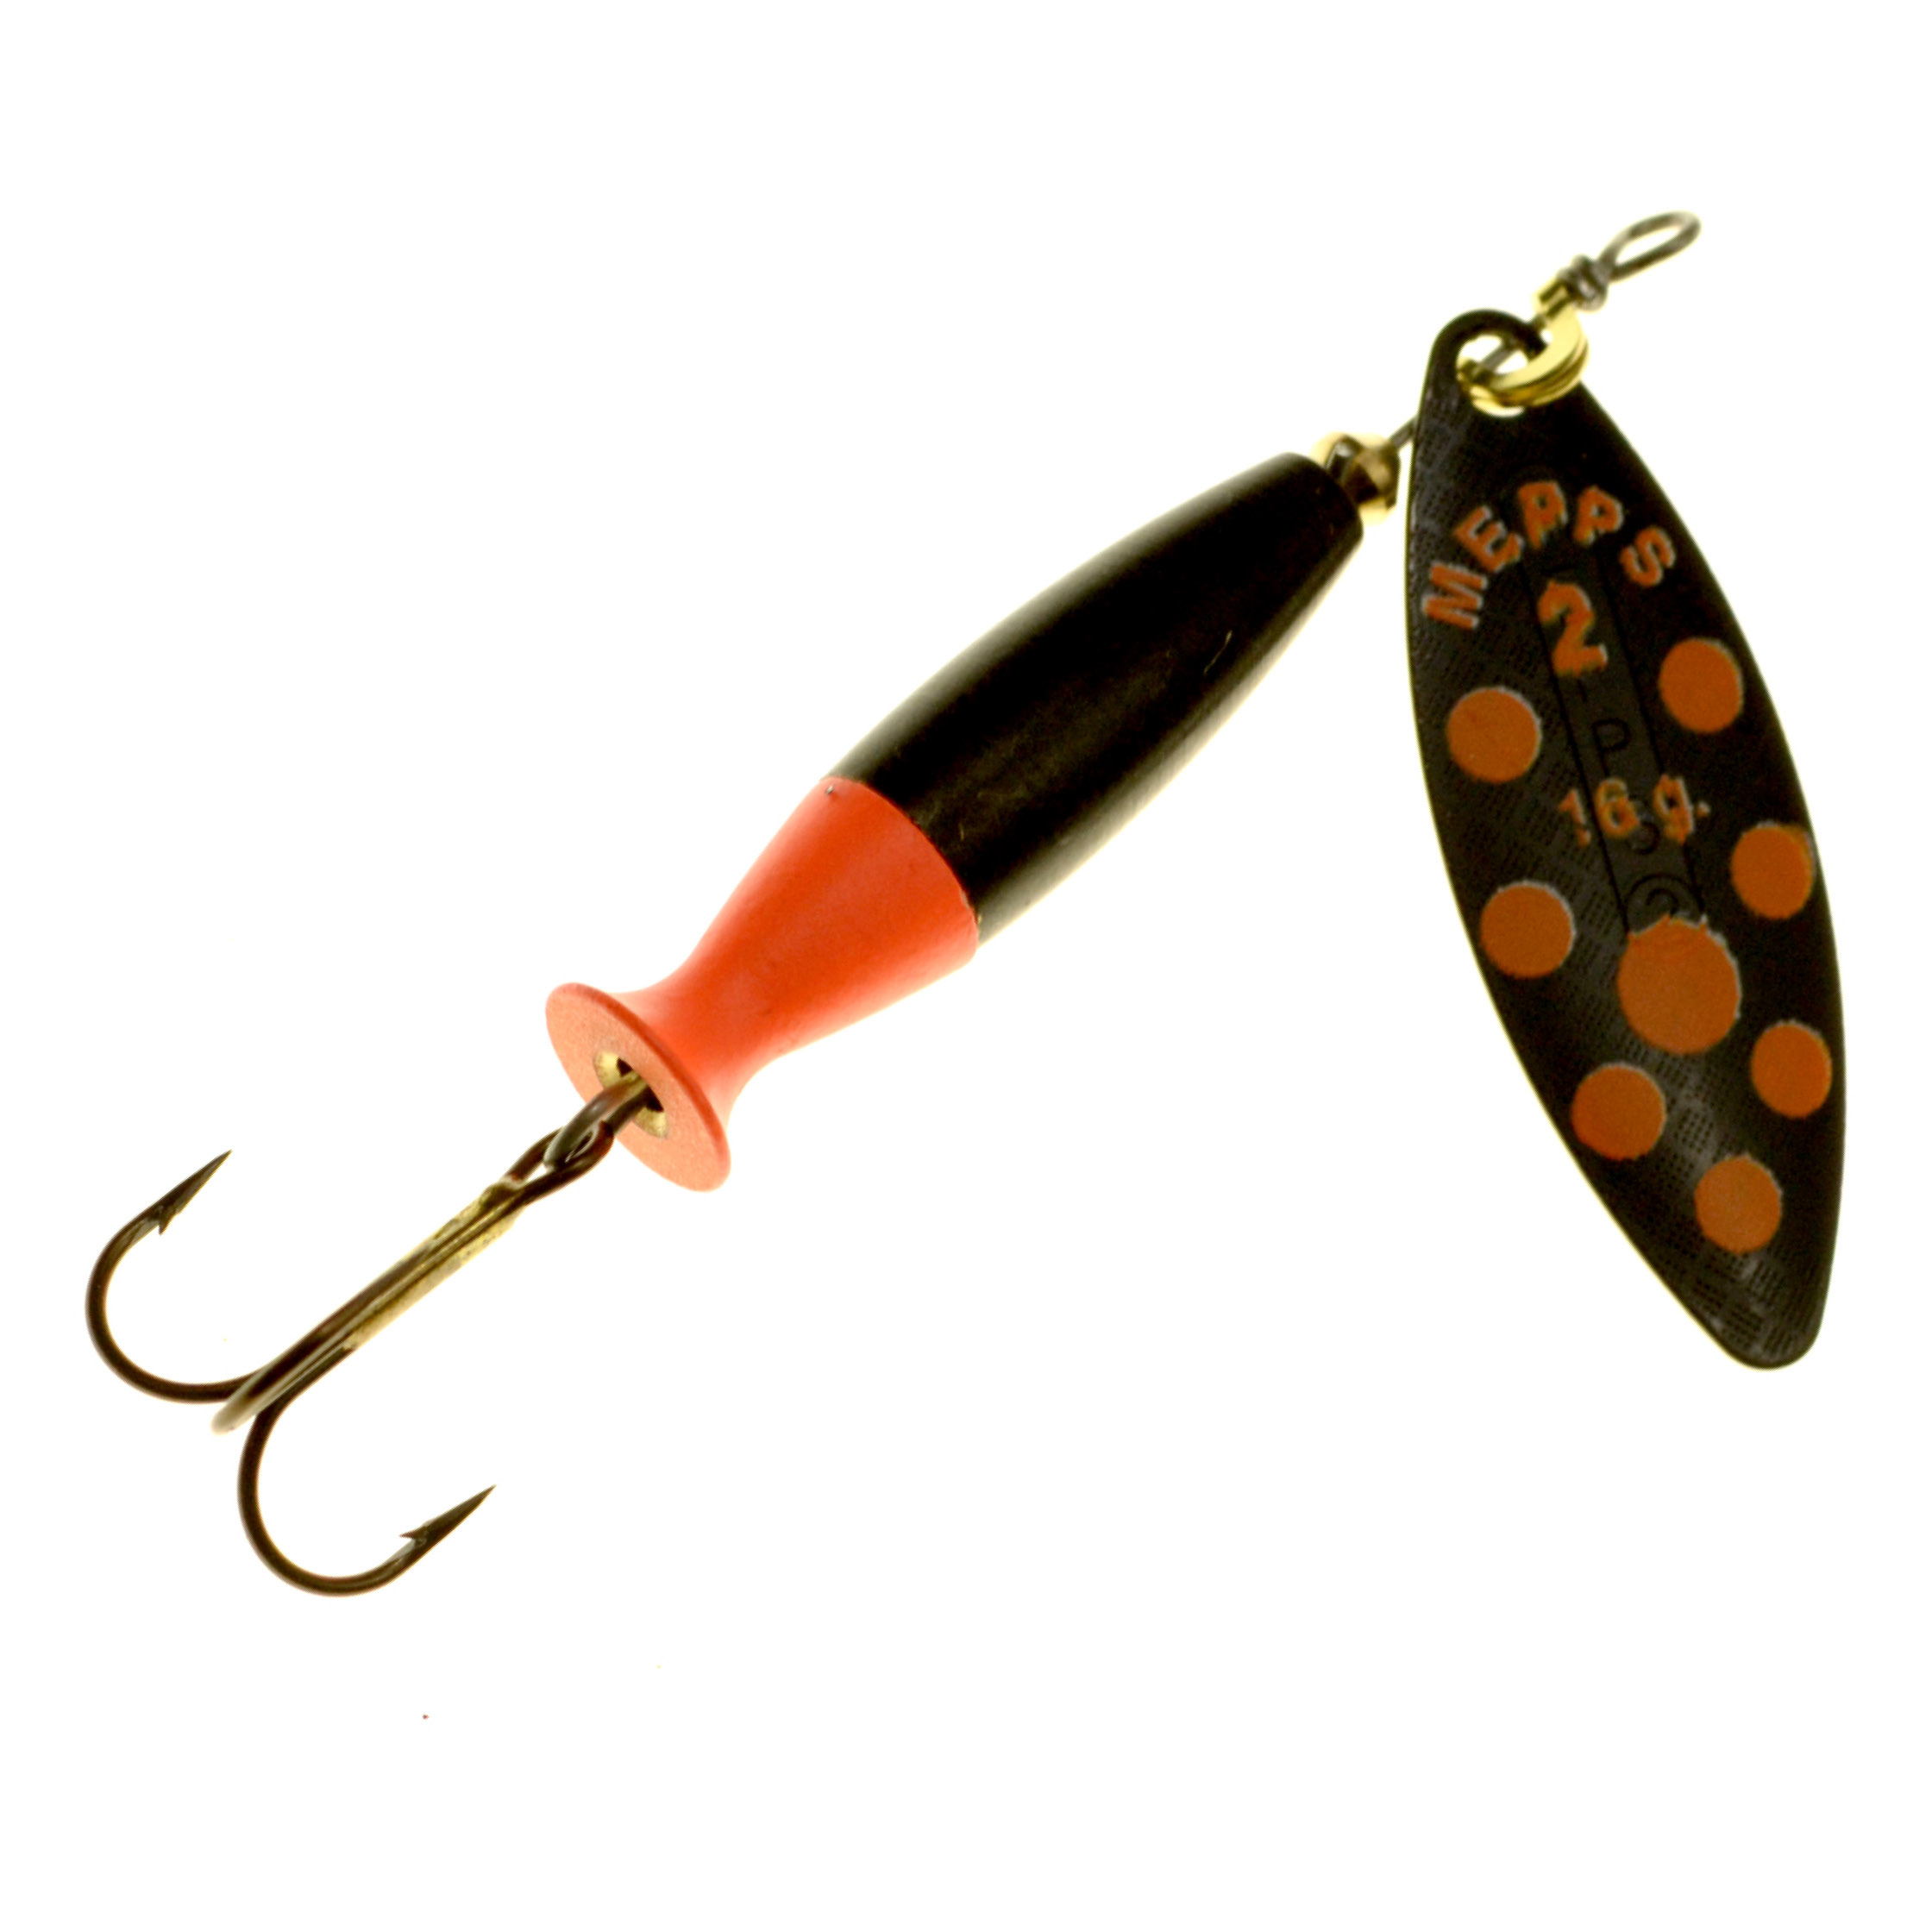 Mepps Aglia Longue Heavy Spinner black/red dots, Metalbaits, Lures and  Baits, Spin Fishing